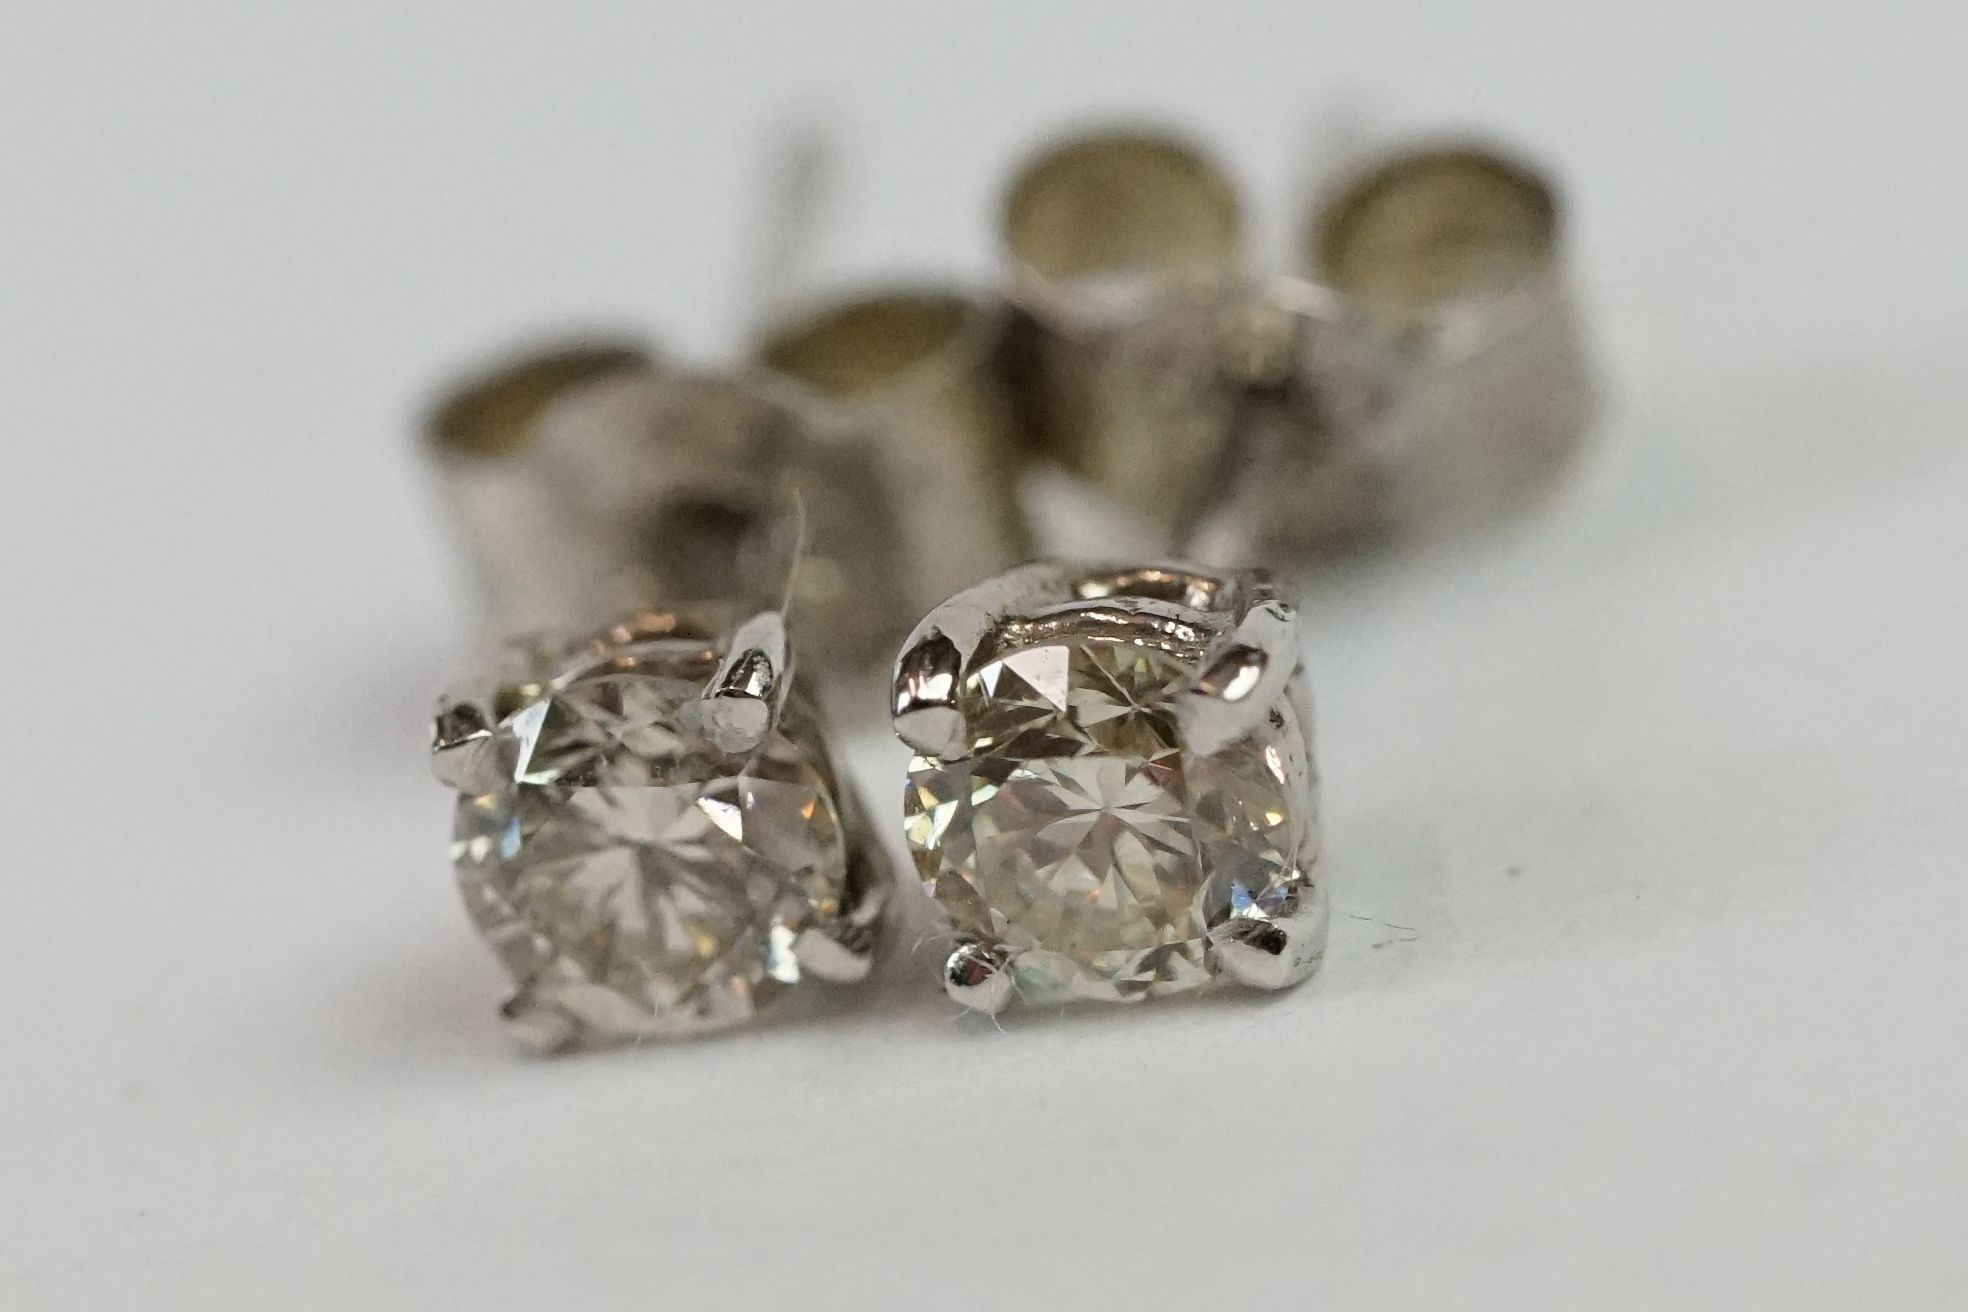 Pair of 14ct White Gold Diamond Stud Earrings of 30 points approx. total - Image 7 of 10